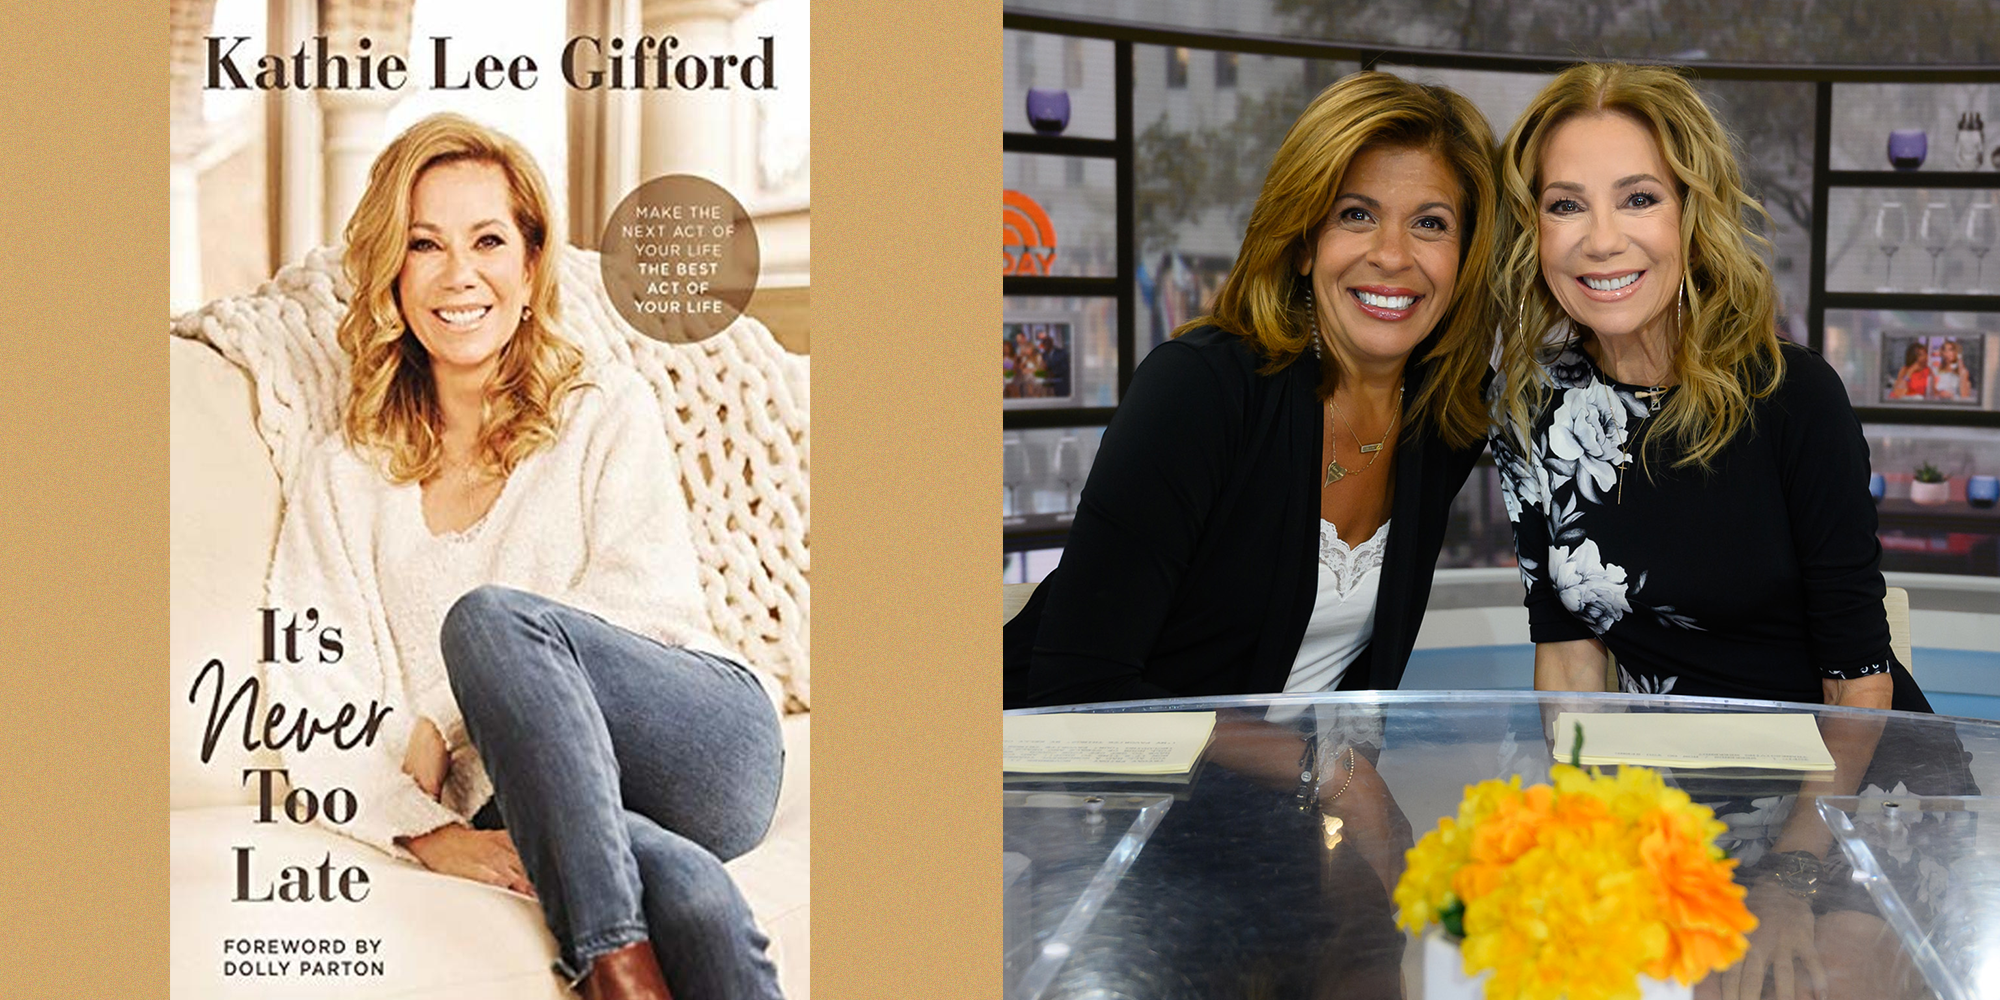 Read an Excerpt From Kathie Lee Gifford's Book It's Never Too Late